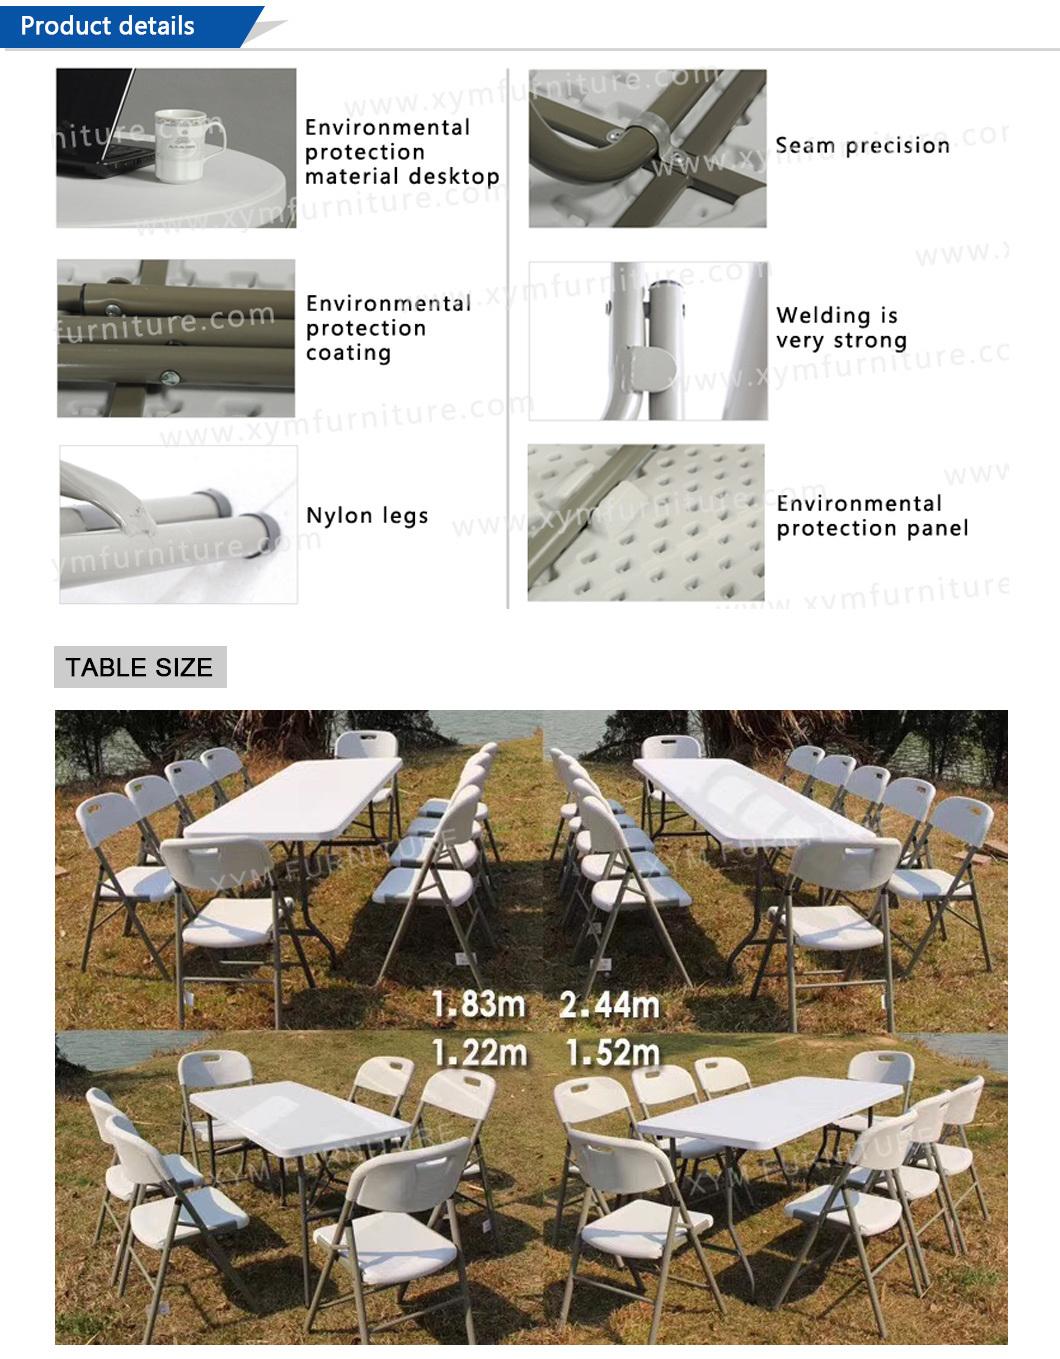 Event Plastic Fortable Round Table Top Foldingtable Set for Banquet